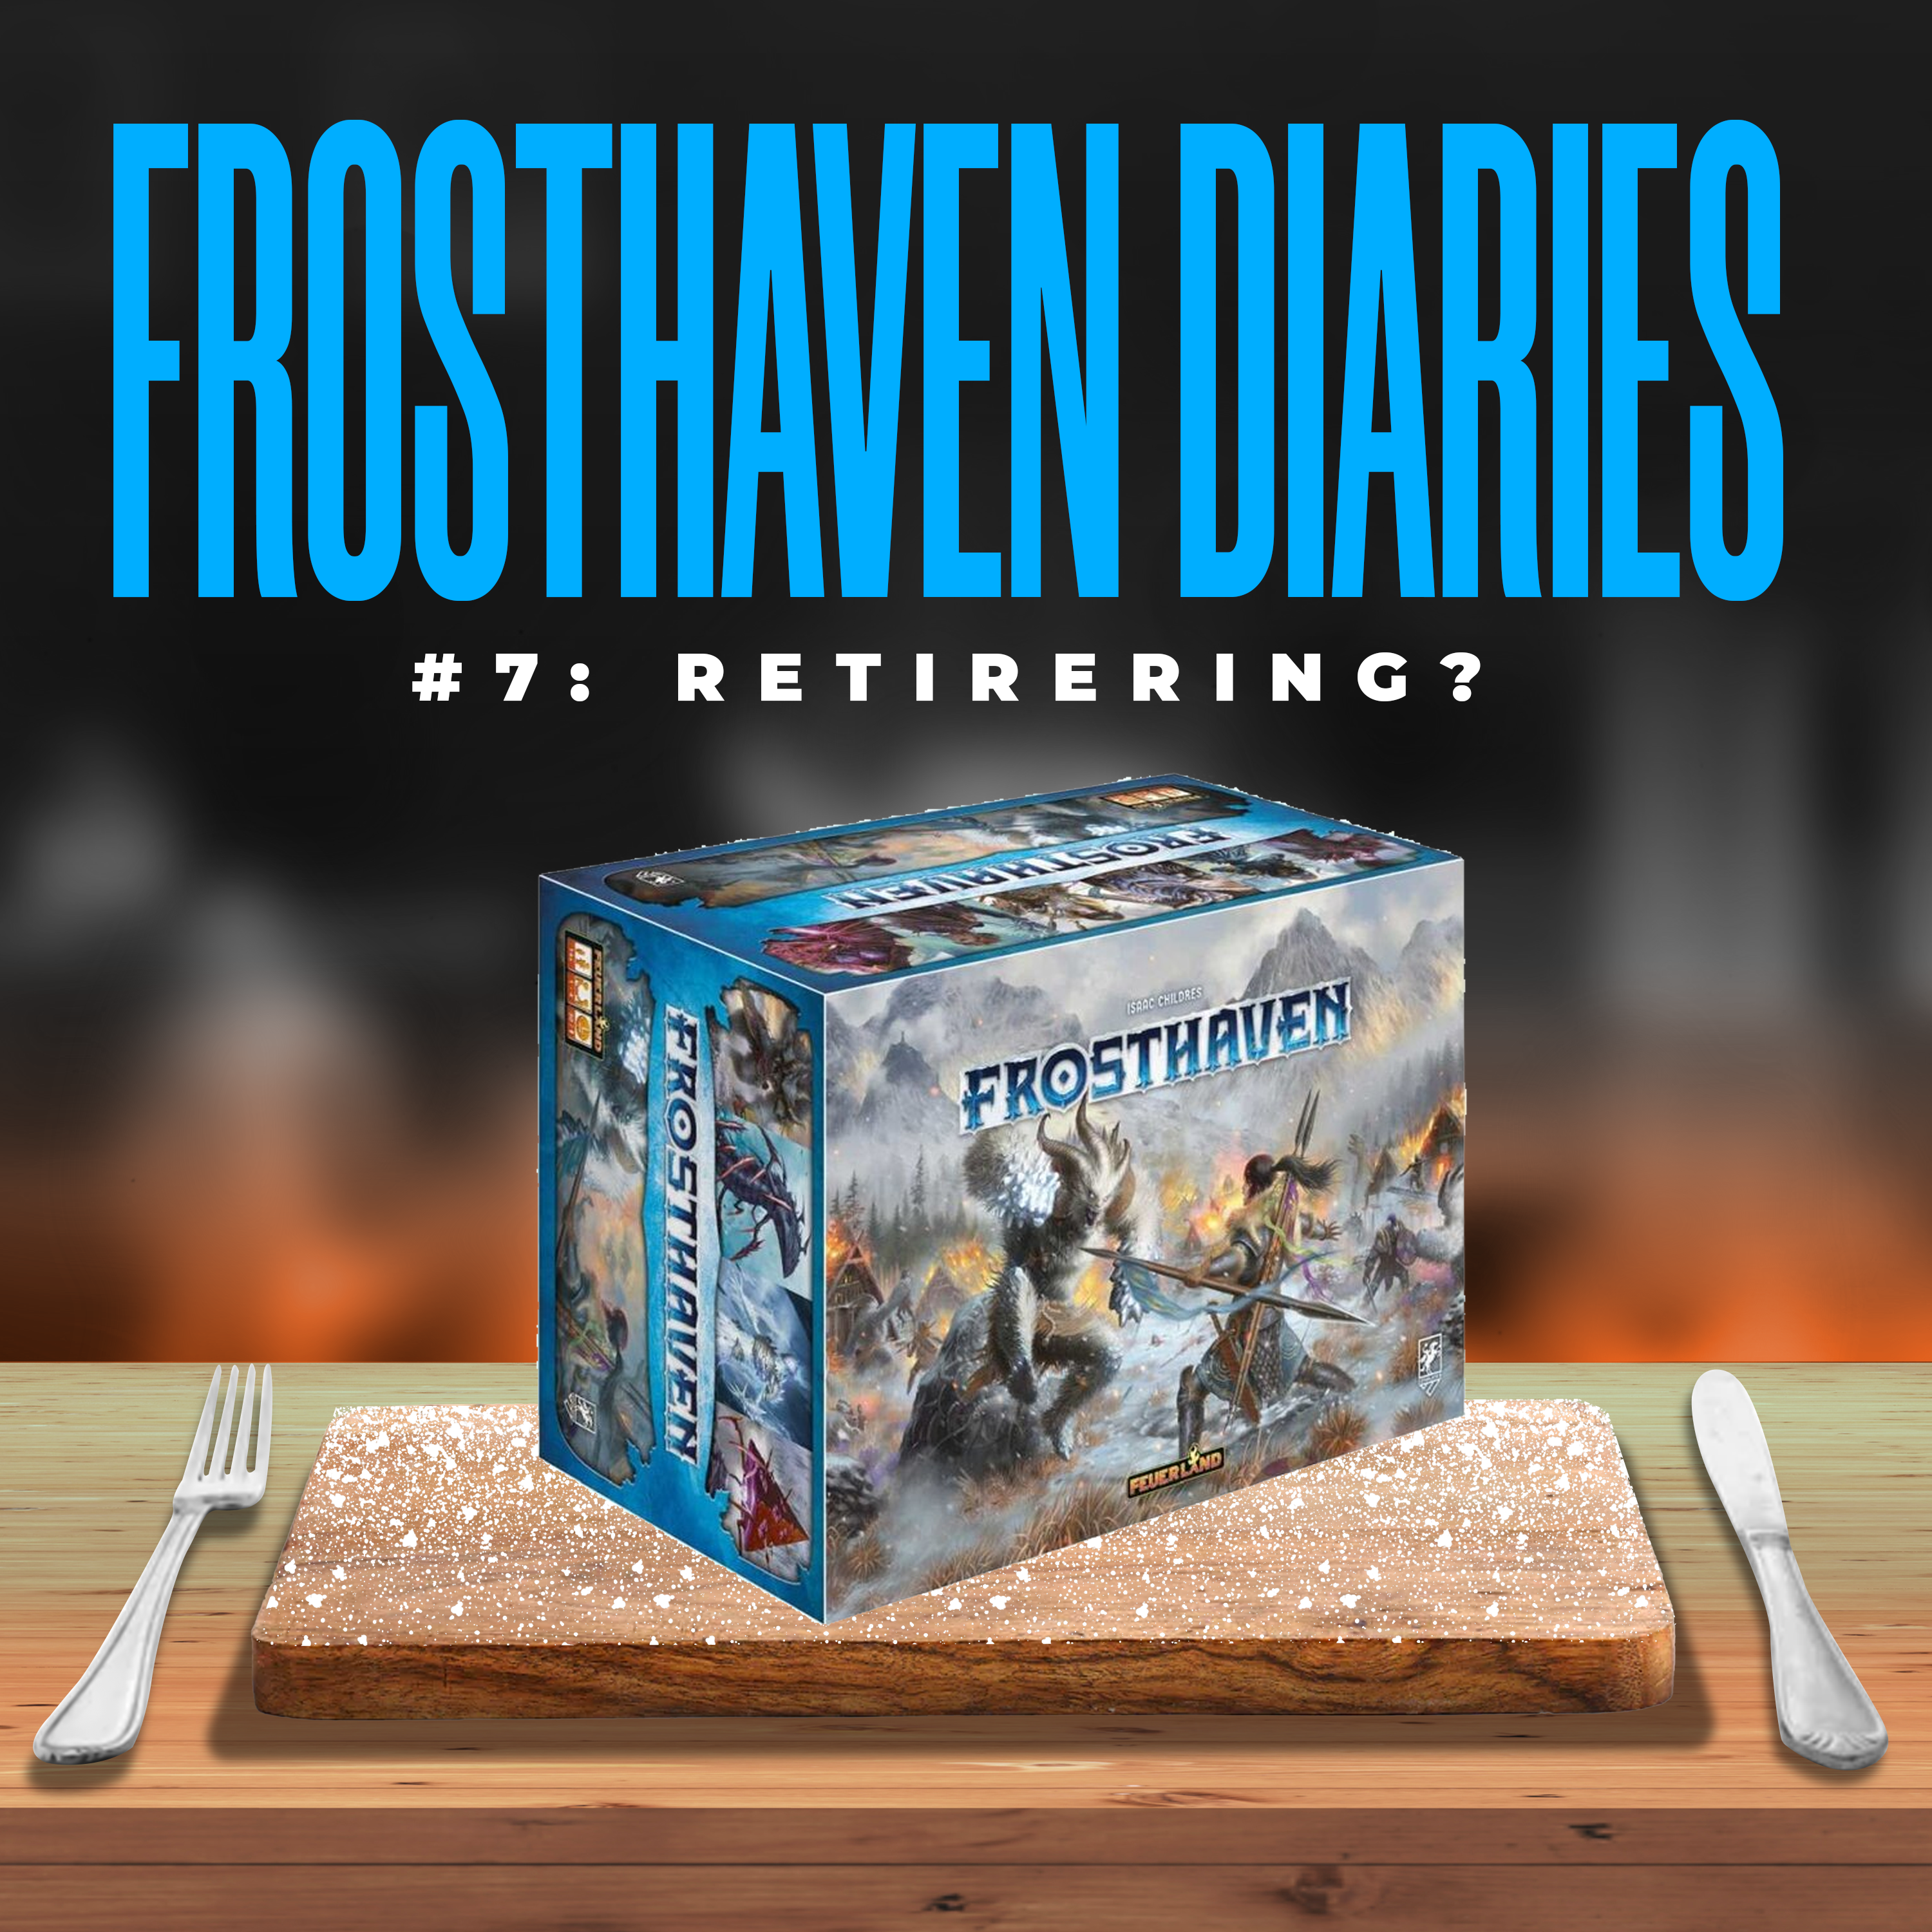 Frosthaven Diaries #7: Retirement?